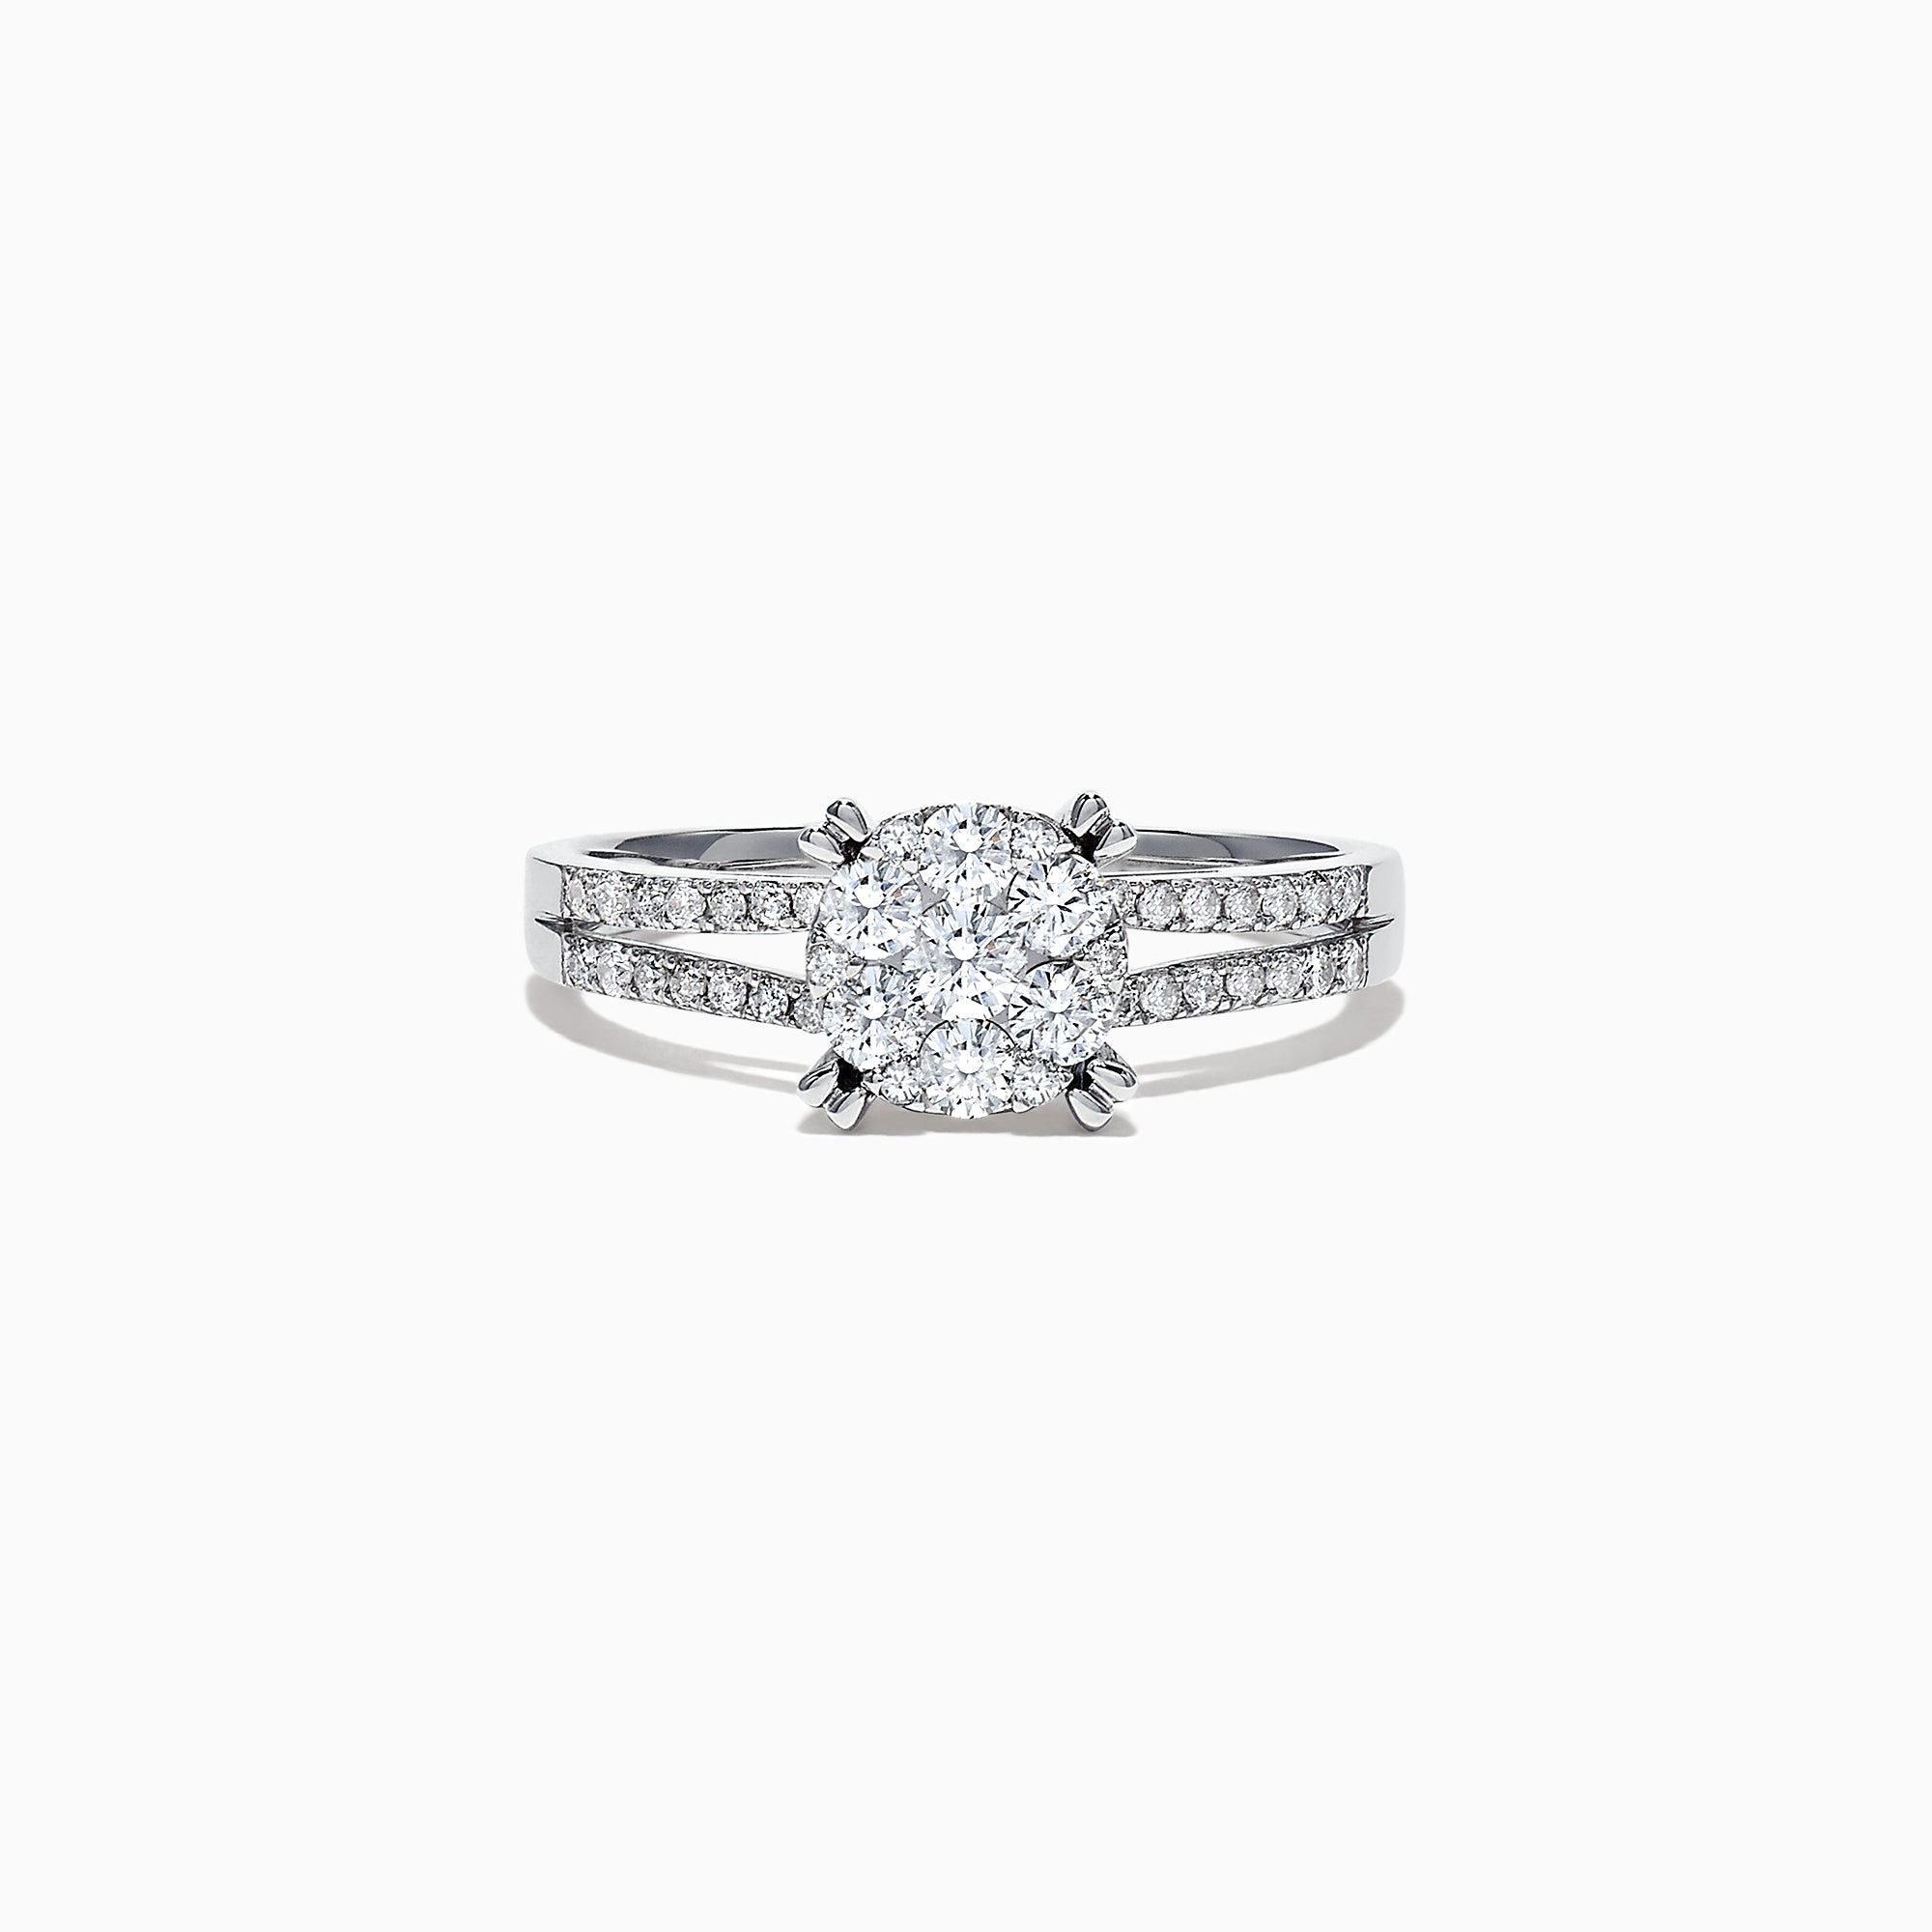 Effy Bouquet 14K White Gold Diamond Cluster Engagement Ring, 0.56 TCW